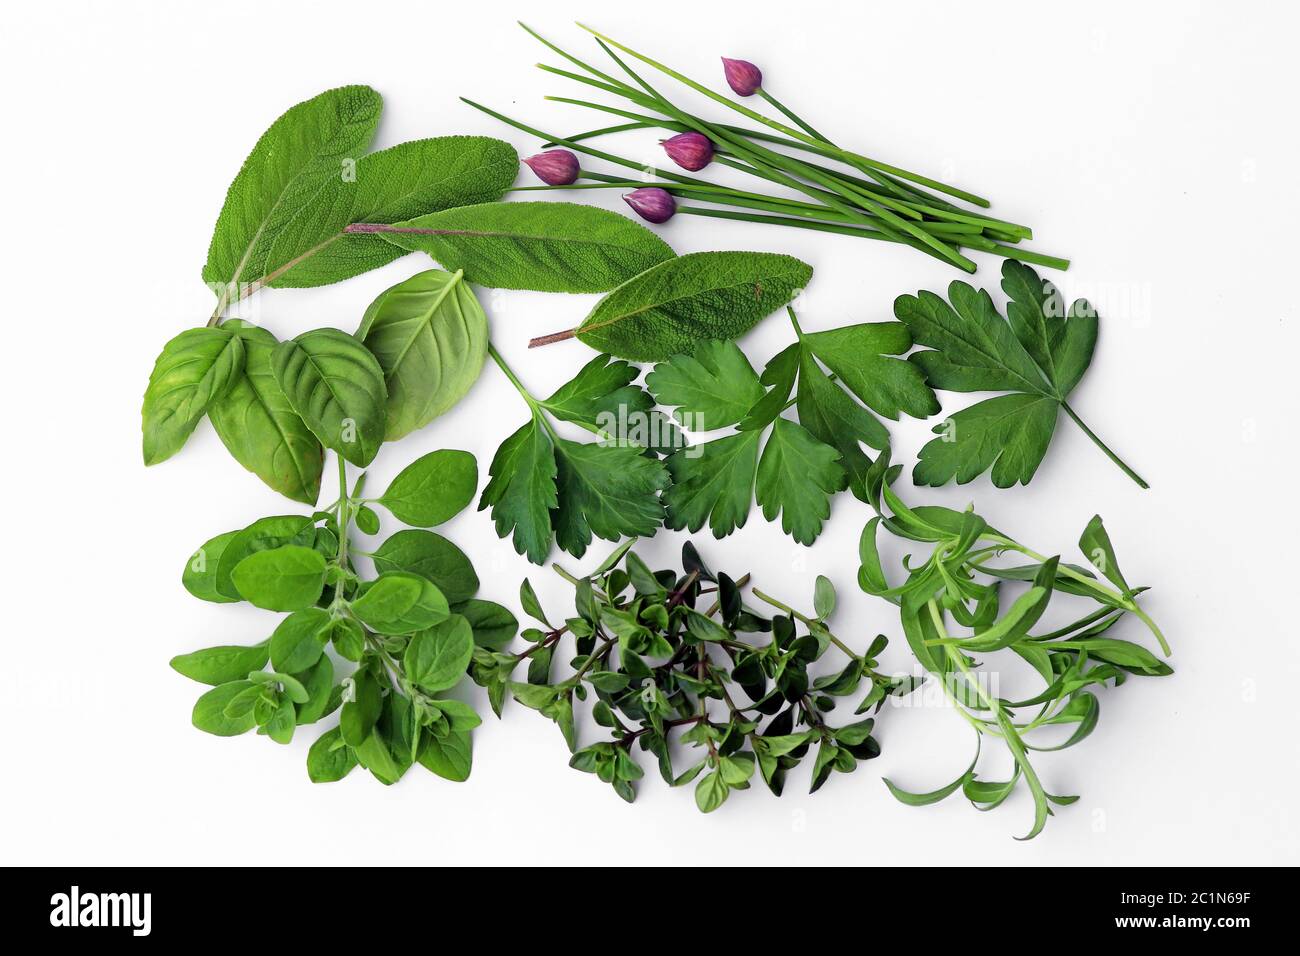 Healthy kitchen herbs - chives, sage, parsley, basil, savory, thyme and oregano Stock Photo